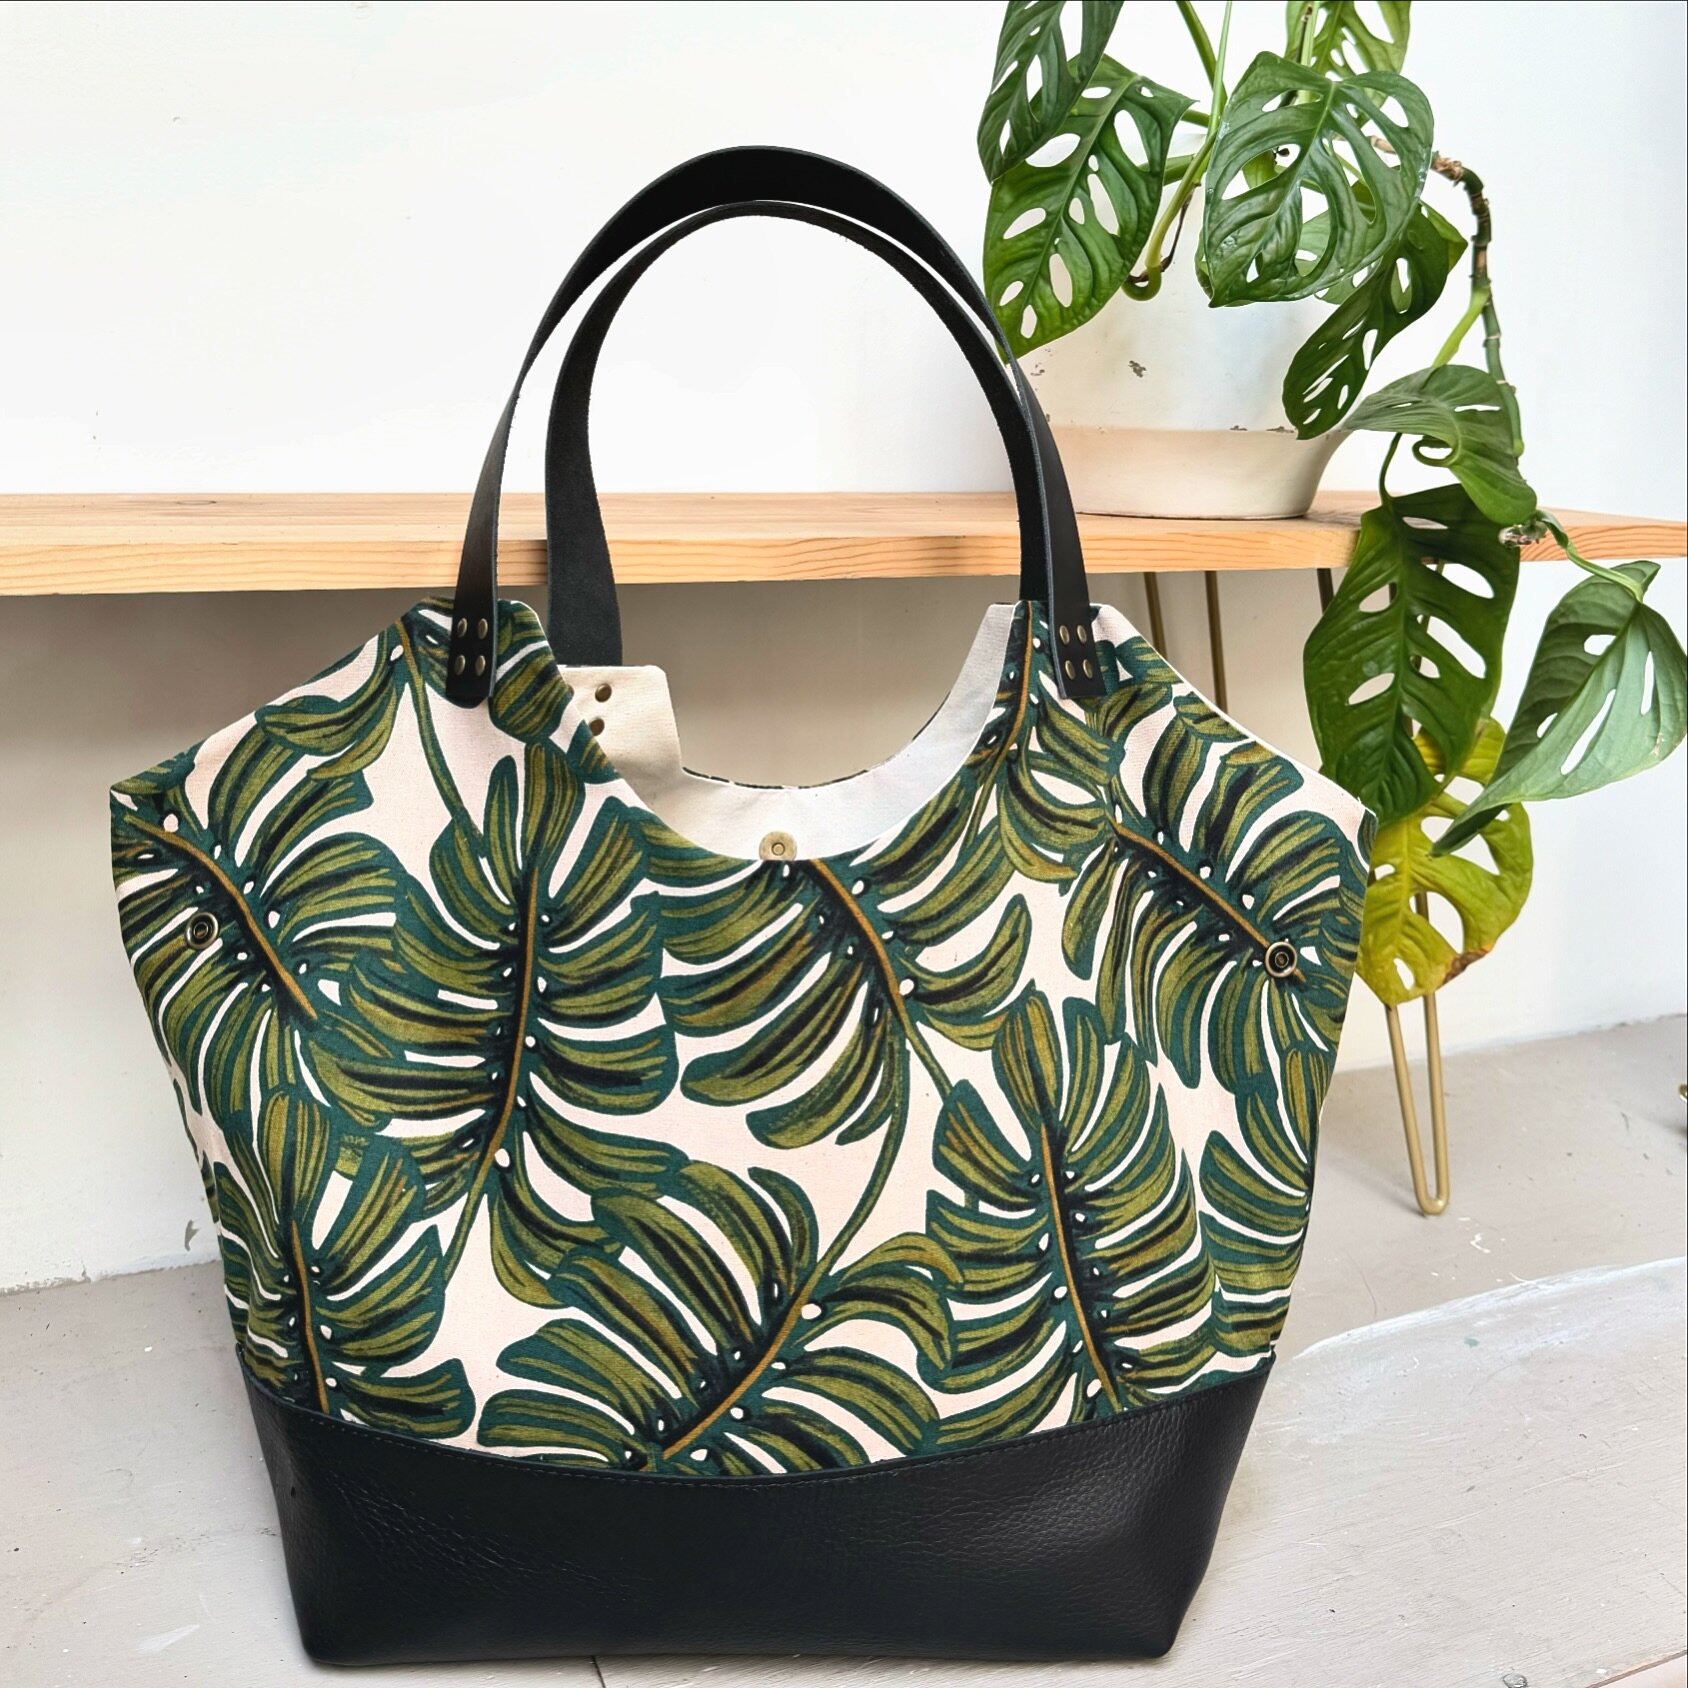 Plant lovers rejoice! 🌿 Our bestselling bag and fabric come together to make magic. The versatile NW Convertible Tote in Monstera! Gorgeous linen canvas, roomy interior pockets, convertible design to quickly expand for more space, brass hardware / c